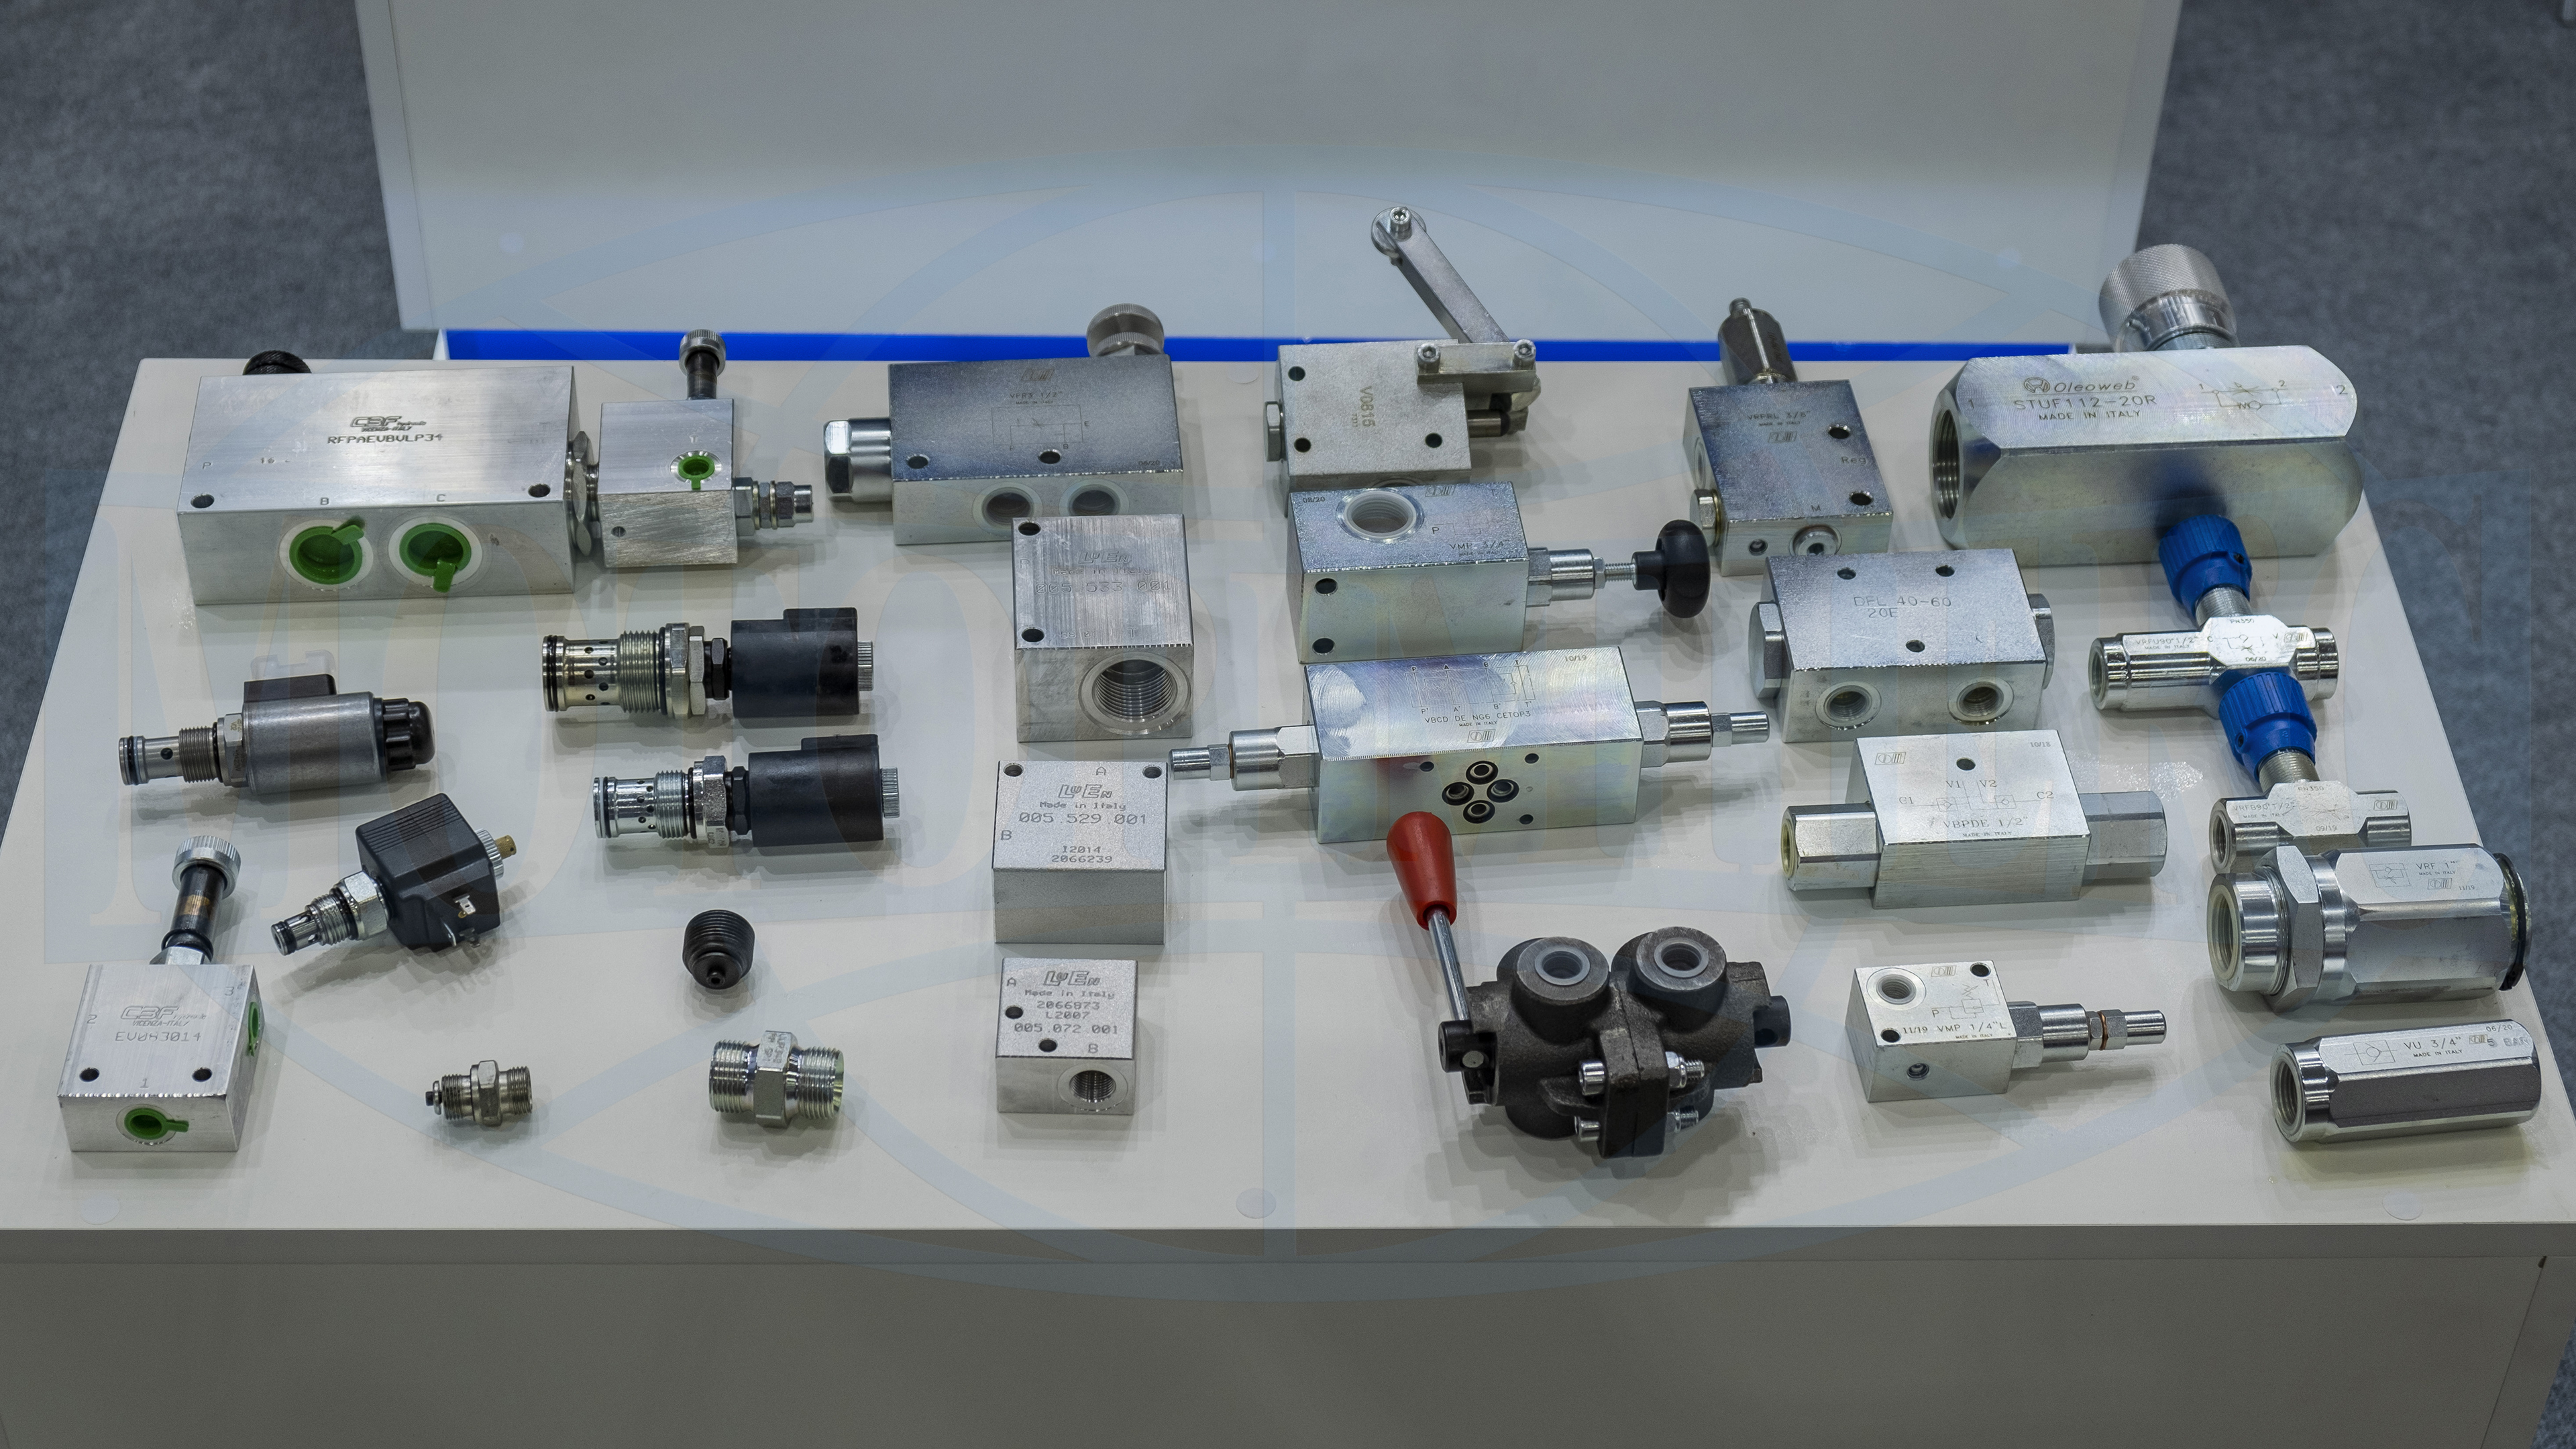 Hydraulic valves from the 'Motorimpex' Group of companies at the International Industrial Forum 2020